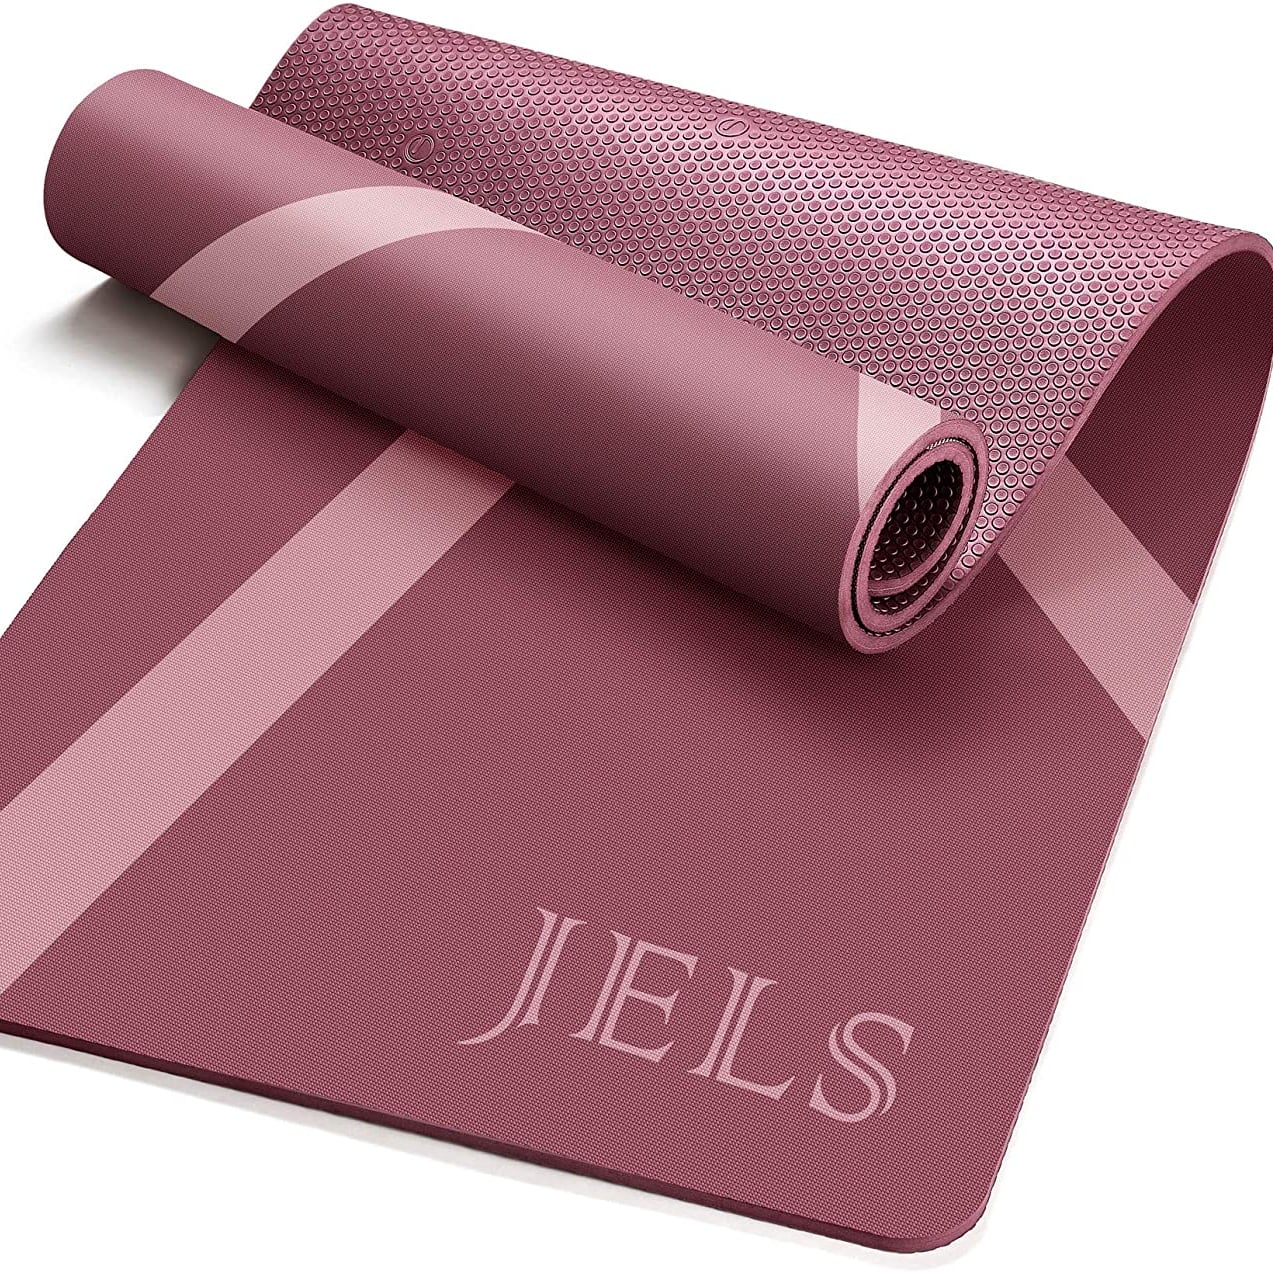 what is the best yoga mat to buy